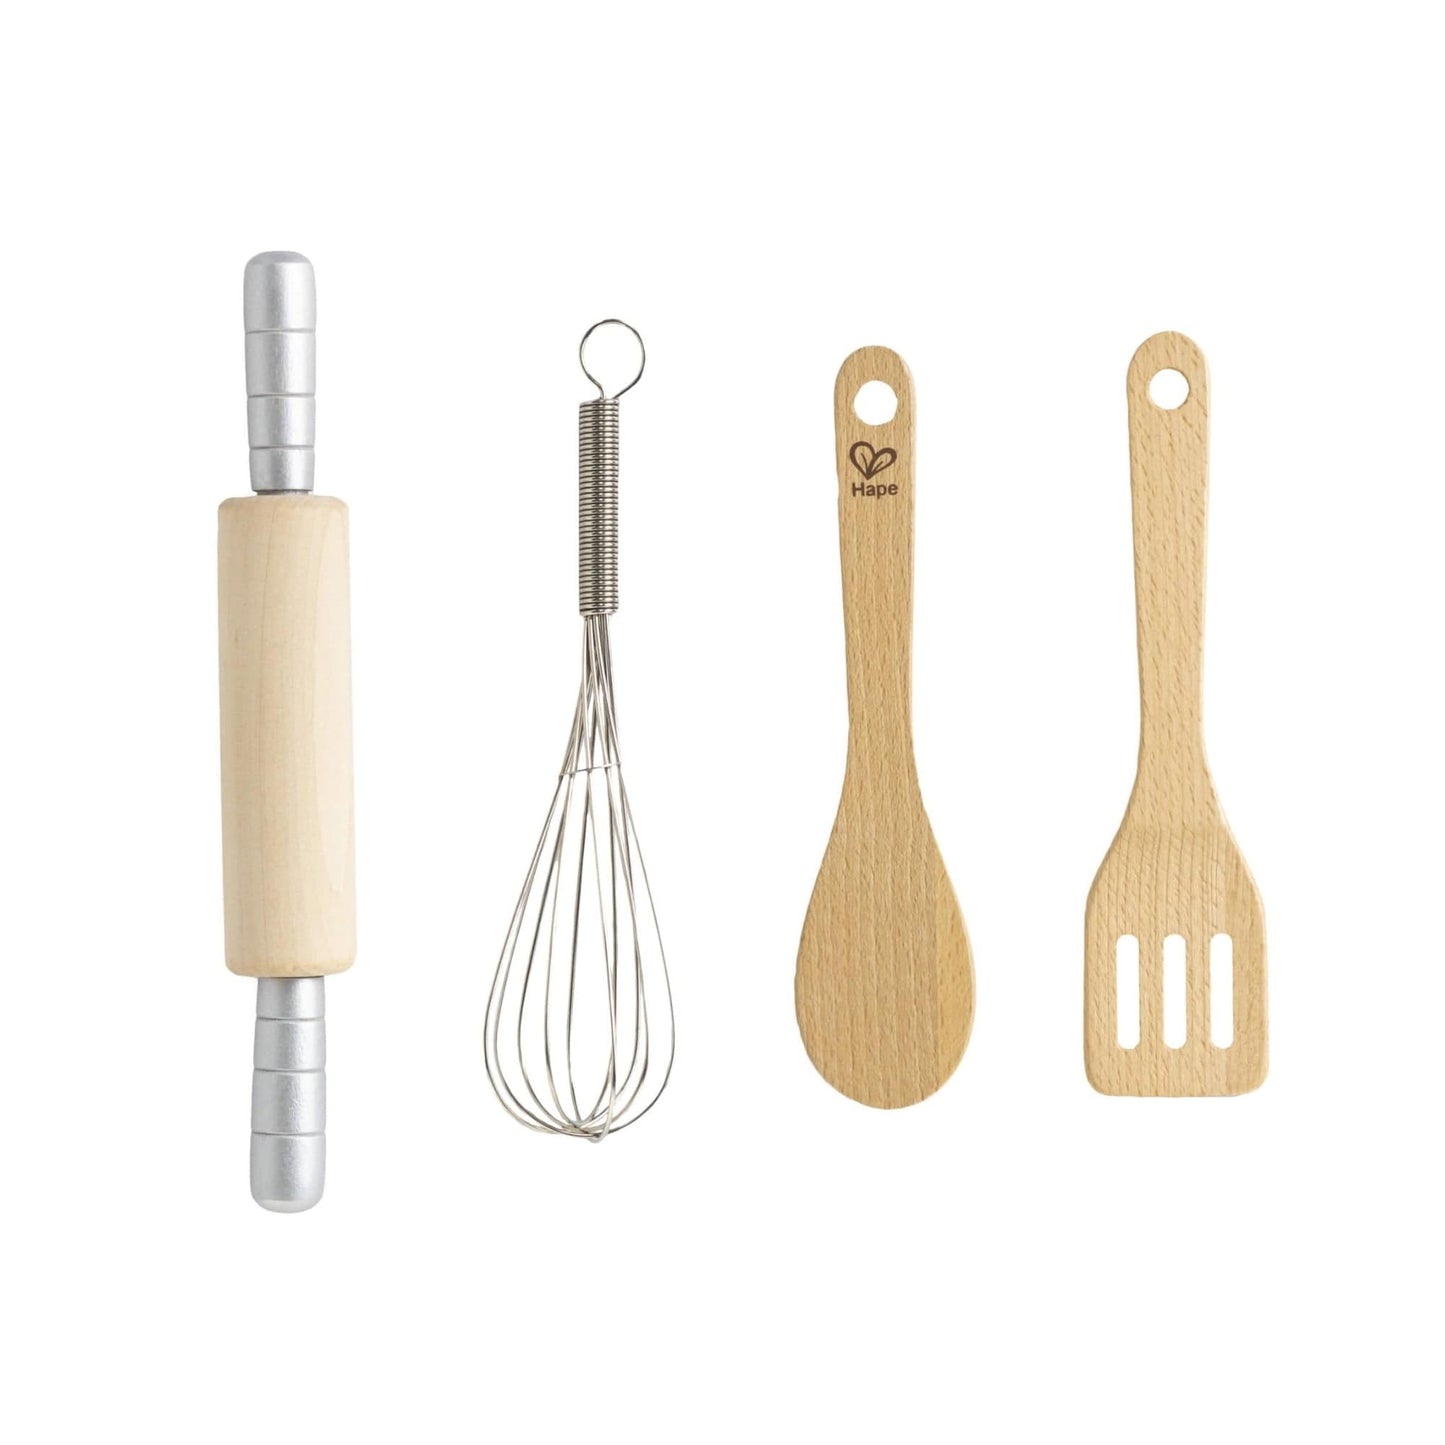 Jr. Chef's 7-Piece Metal and Wood Kitchen Cooking Set